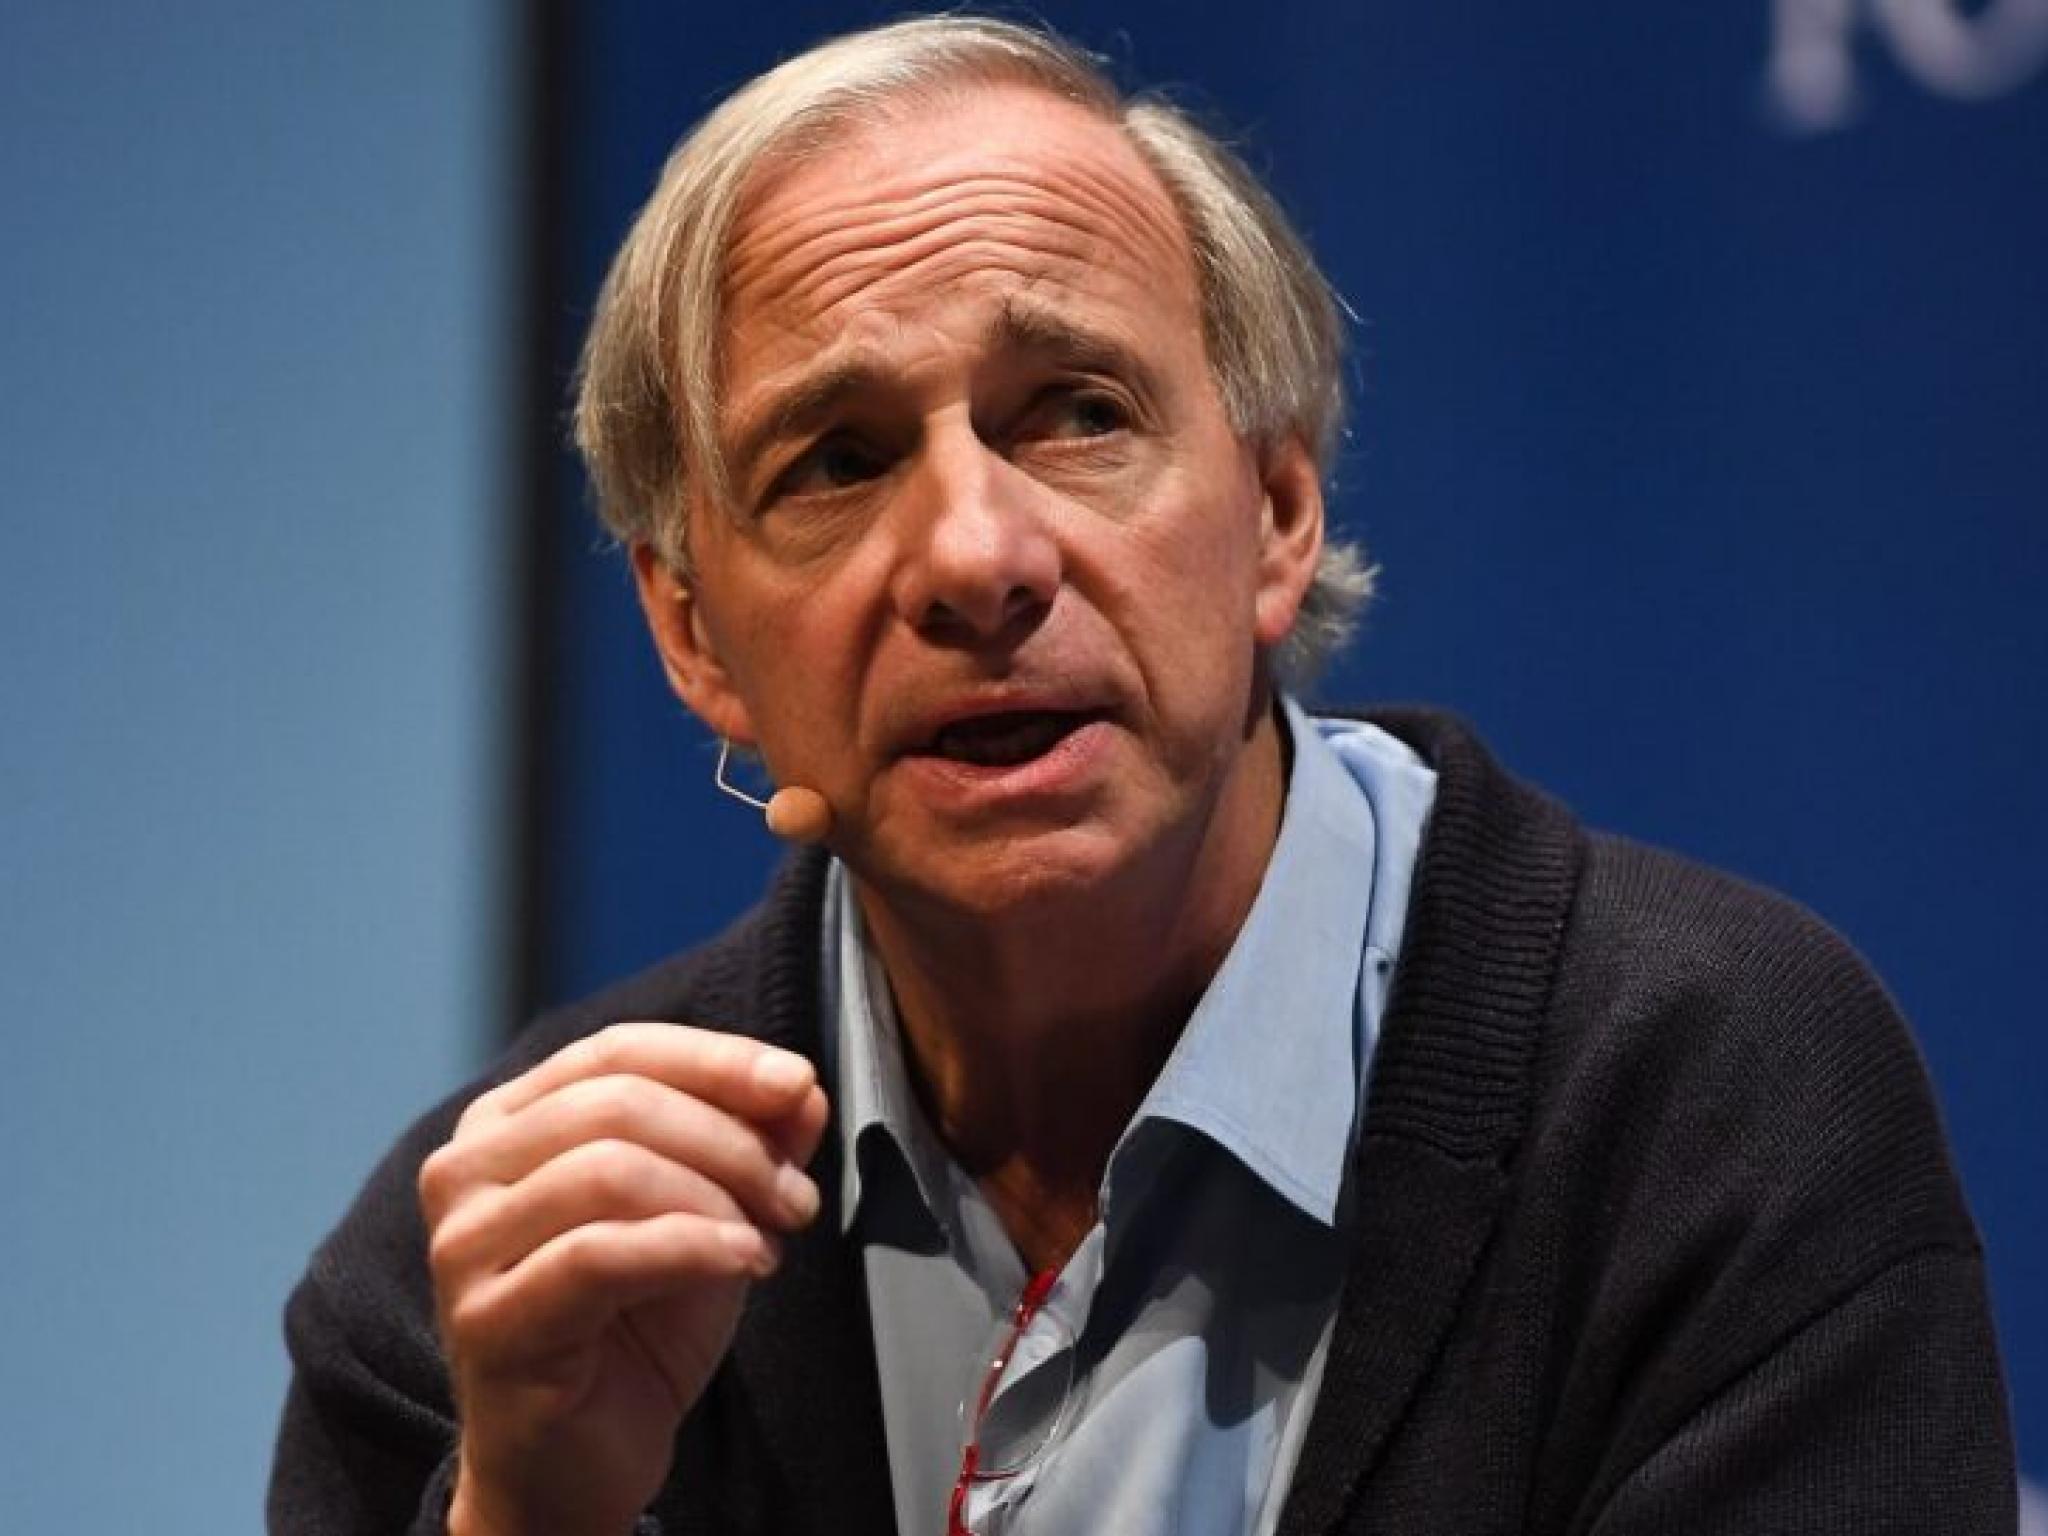  ray-dalio-us-on-the-brink-of-civil-war-but-not-one-where-people-grab-guns-and-start-shooting 